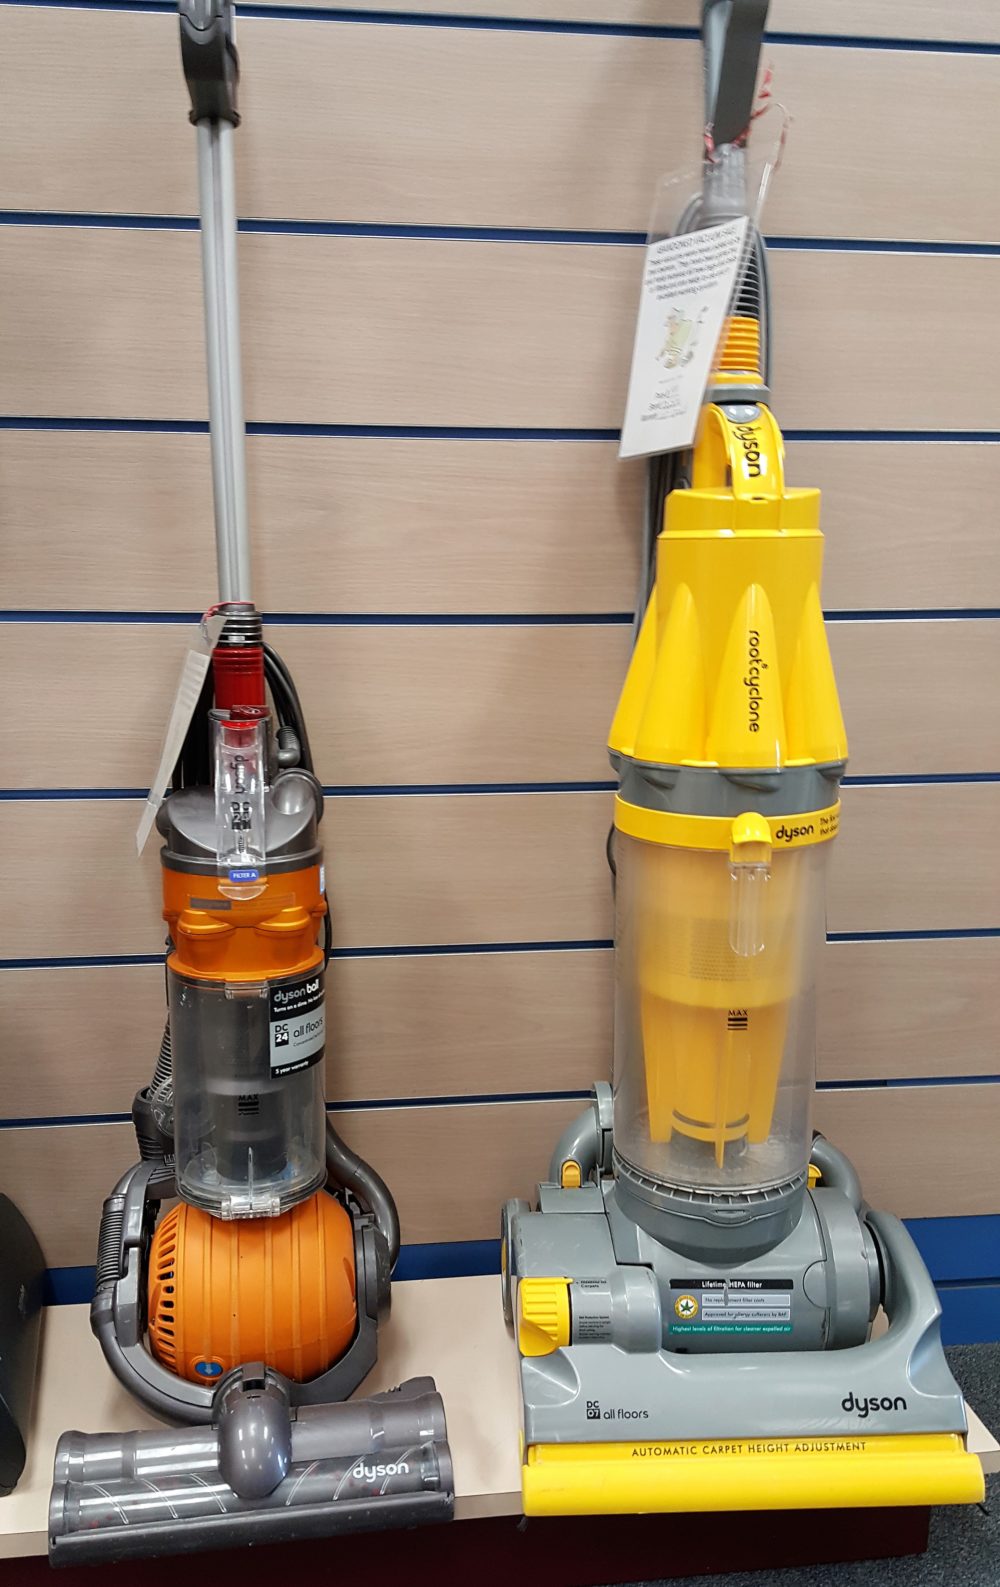 Abandoned vacuums for sale